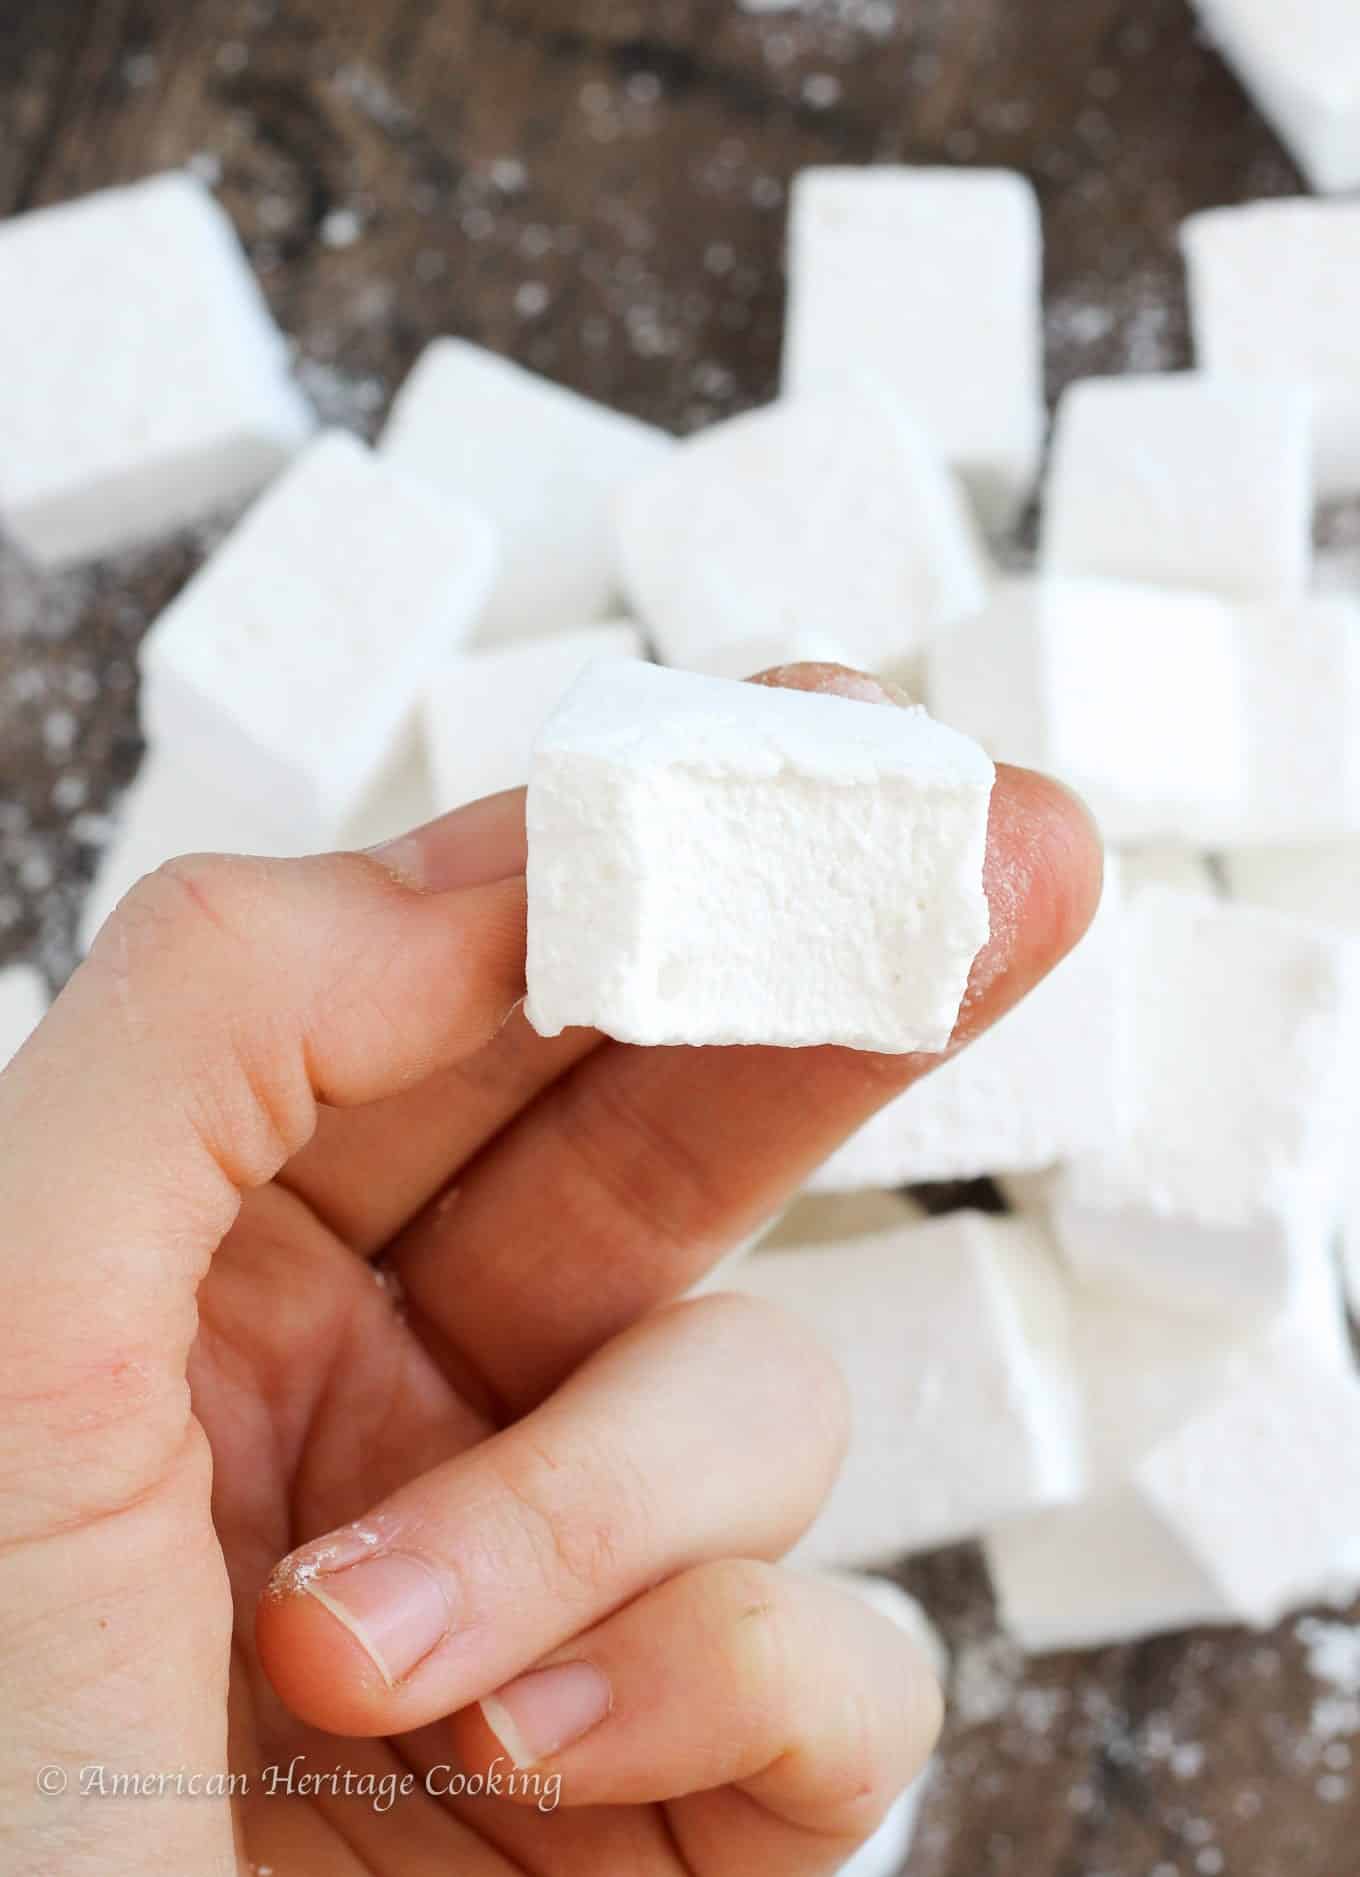 Instantly elevate your hot chocolate, s’mores, or campfire game with these homemade marshmallows! They are soft and fluffy, and perfectly sweet with just a hint of vanilla.